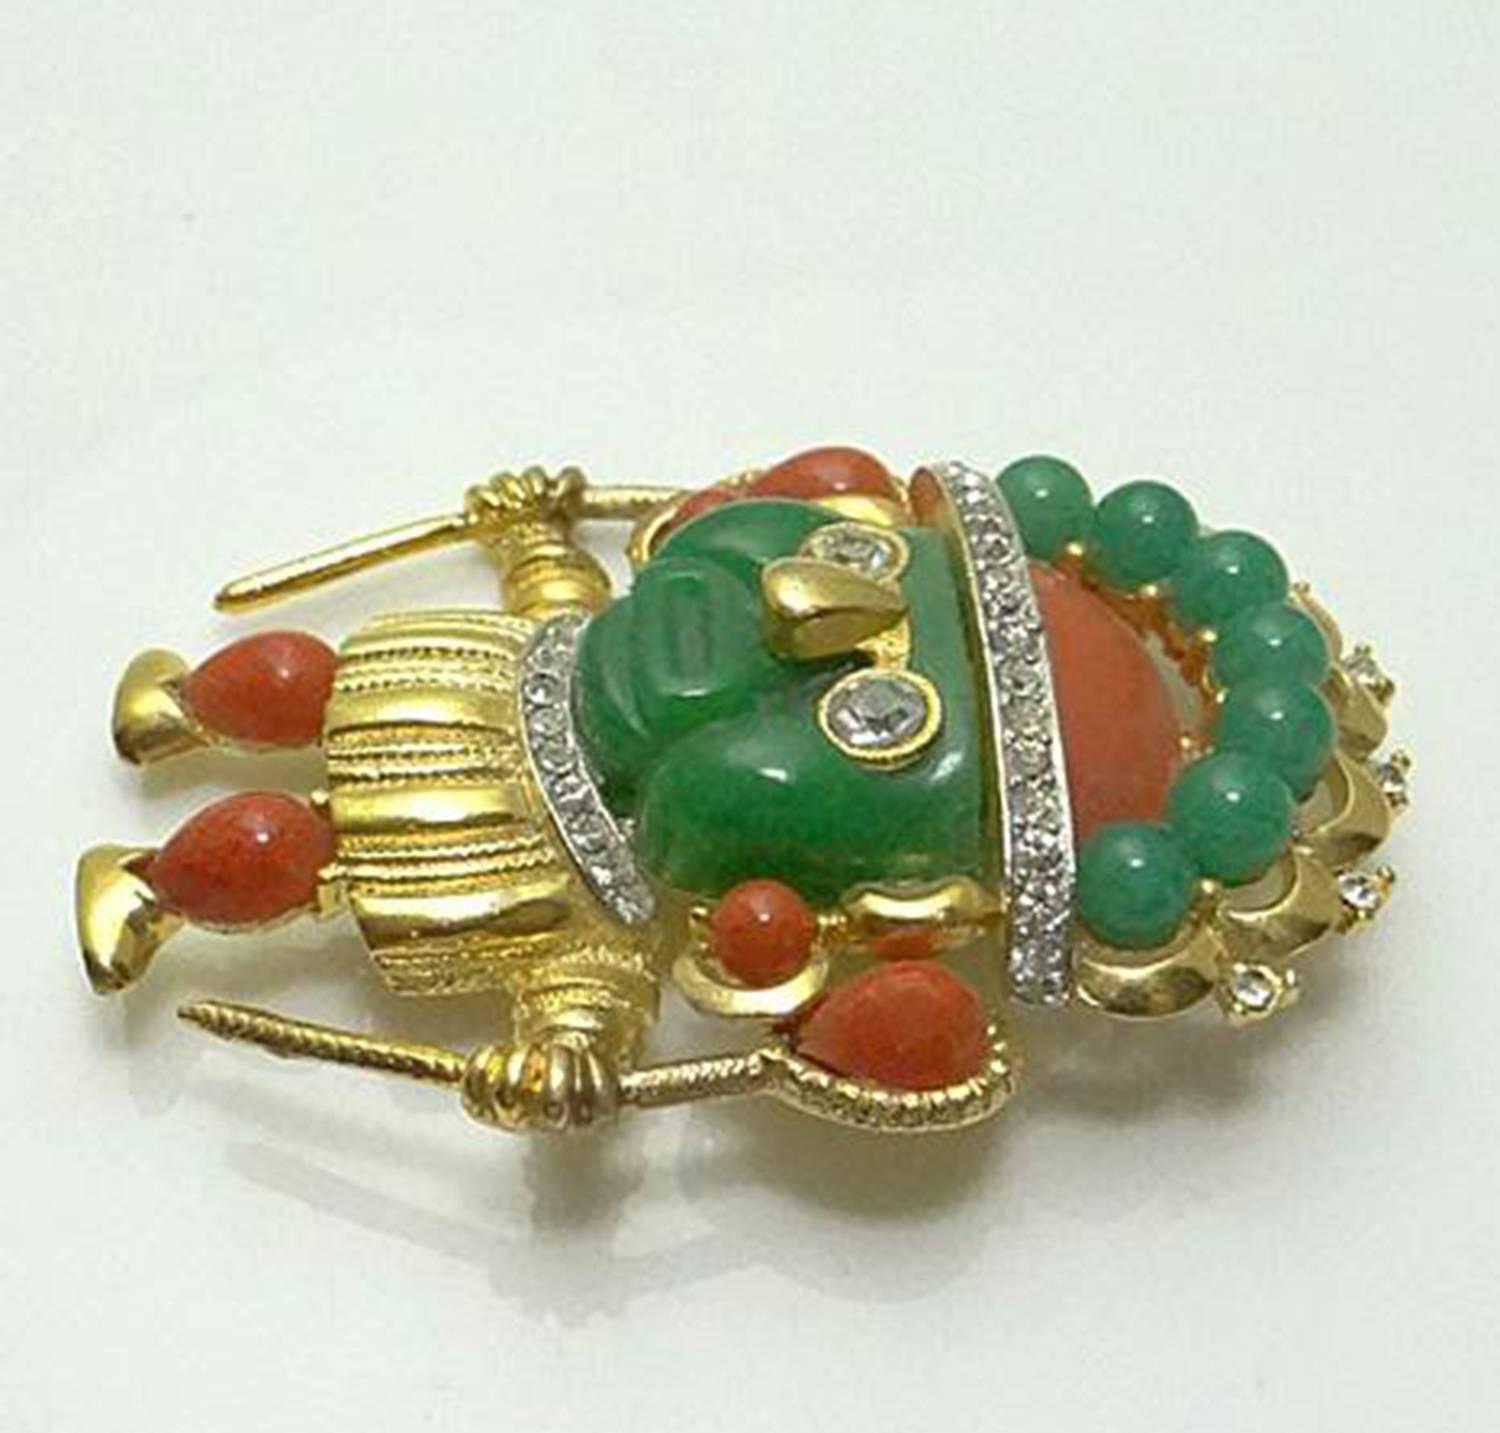 Signed Hattie Carnegie figural pin, depicting an Aztec Warrior adorned with CZ rhinestones, colorful green and orange Lucite stones. The pin measures 2.25” X 1.63”. C1960s. Highly collectible! Fabulous and Timeless as you are… Illuminating your Look